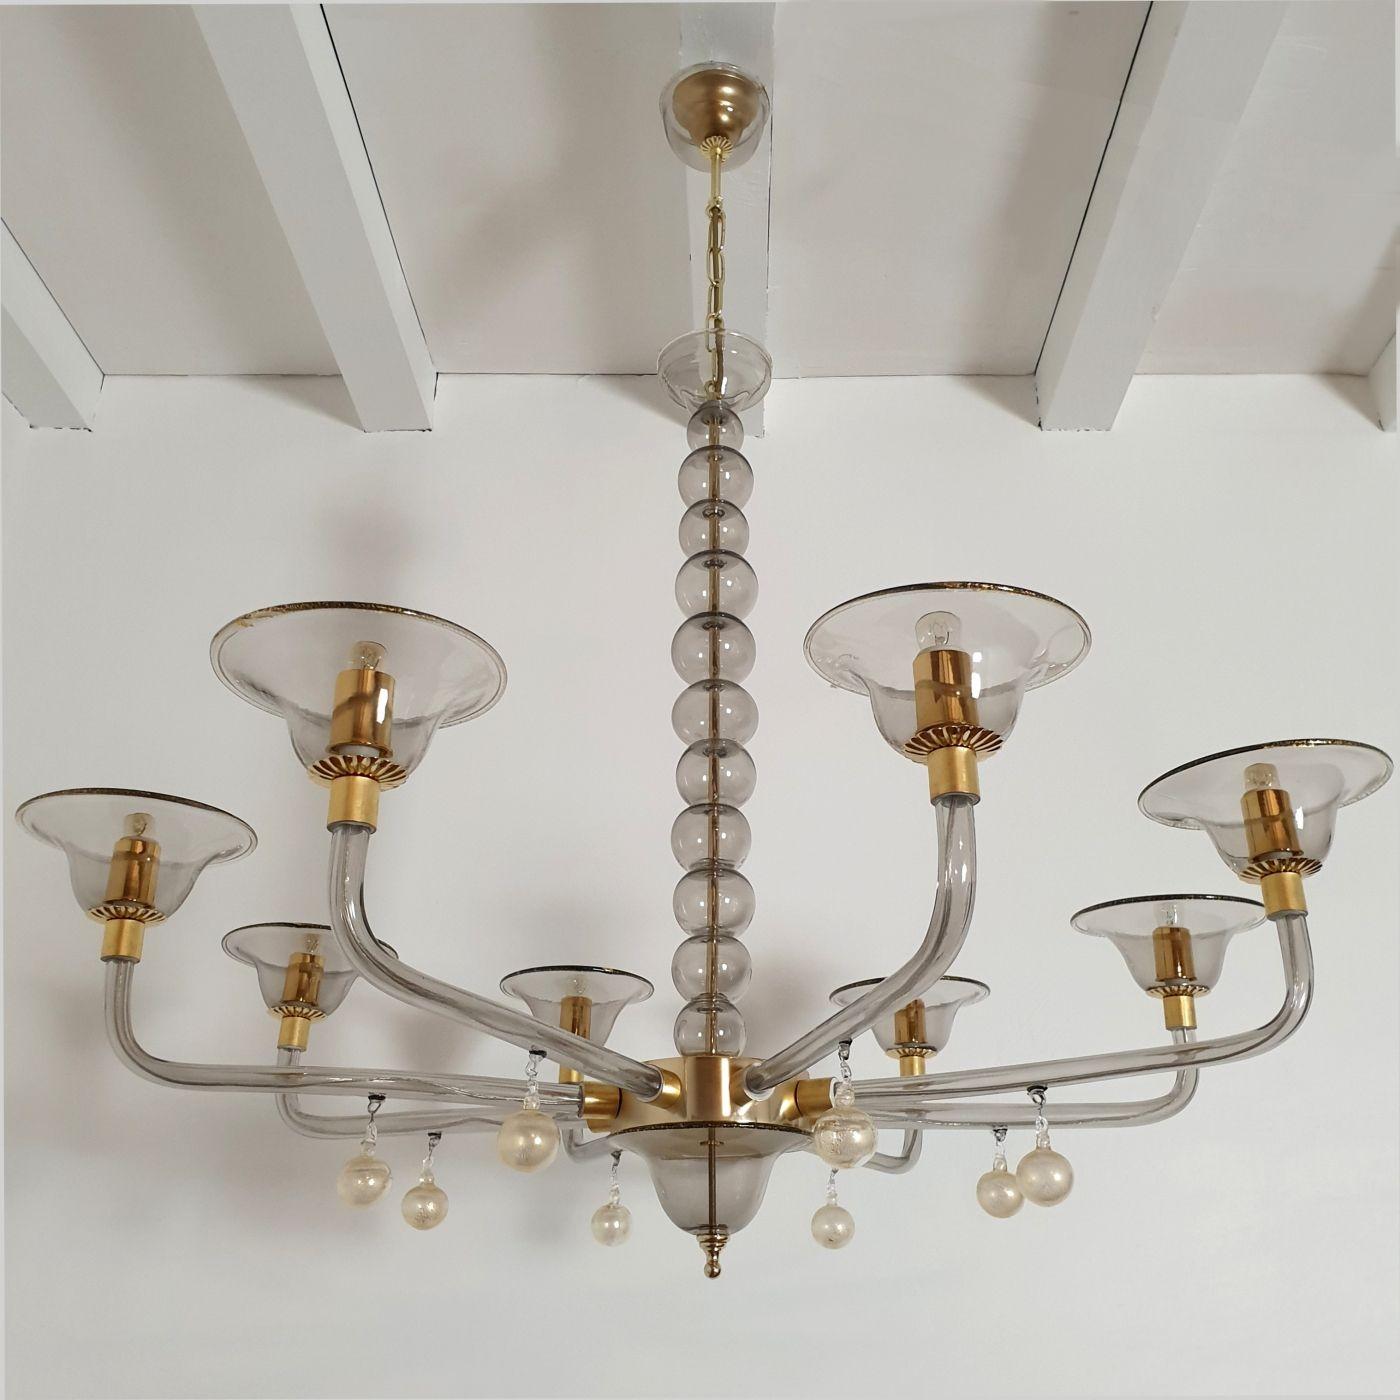 Large hand blown murano light gray / beige transparent glass chandelier.
Attributed to Venini, Italy. Mid-Century Modern lighting. 1970s. The chandelier is made of colors Murano glass, with some gold leaf accents. It has eight arms / lights The